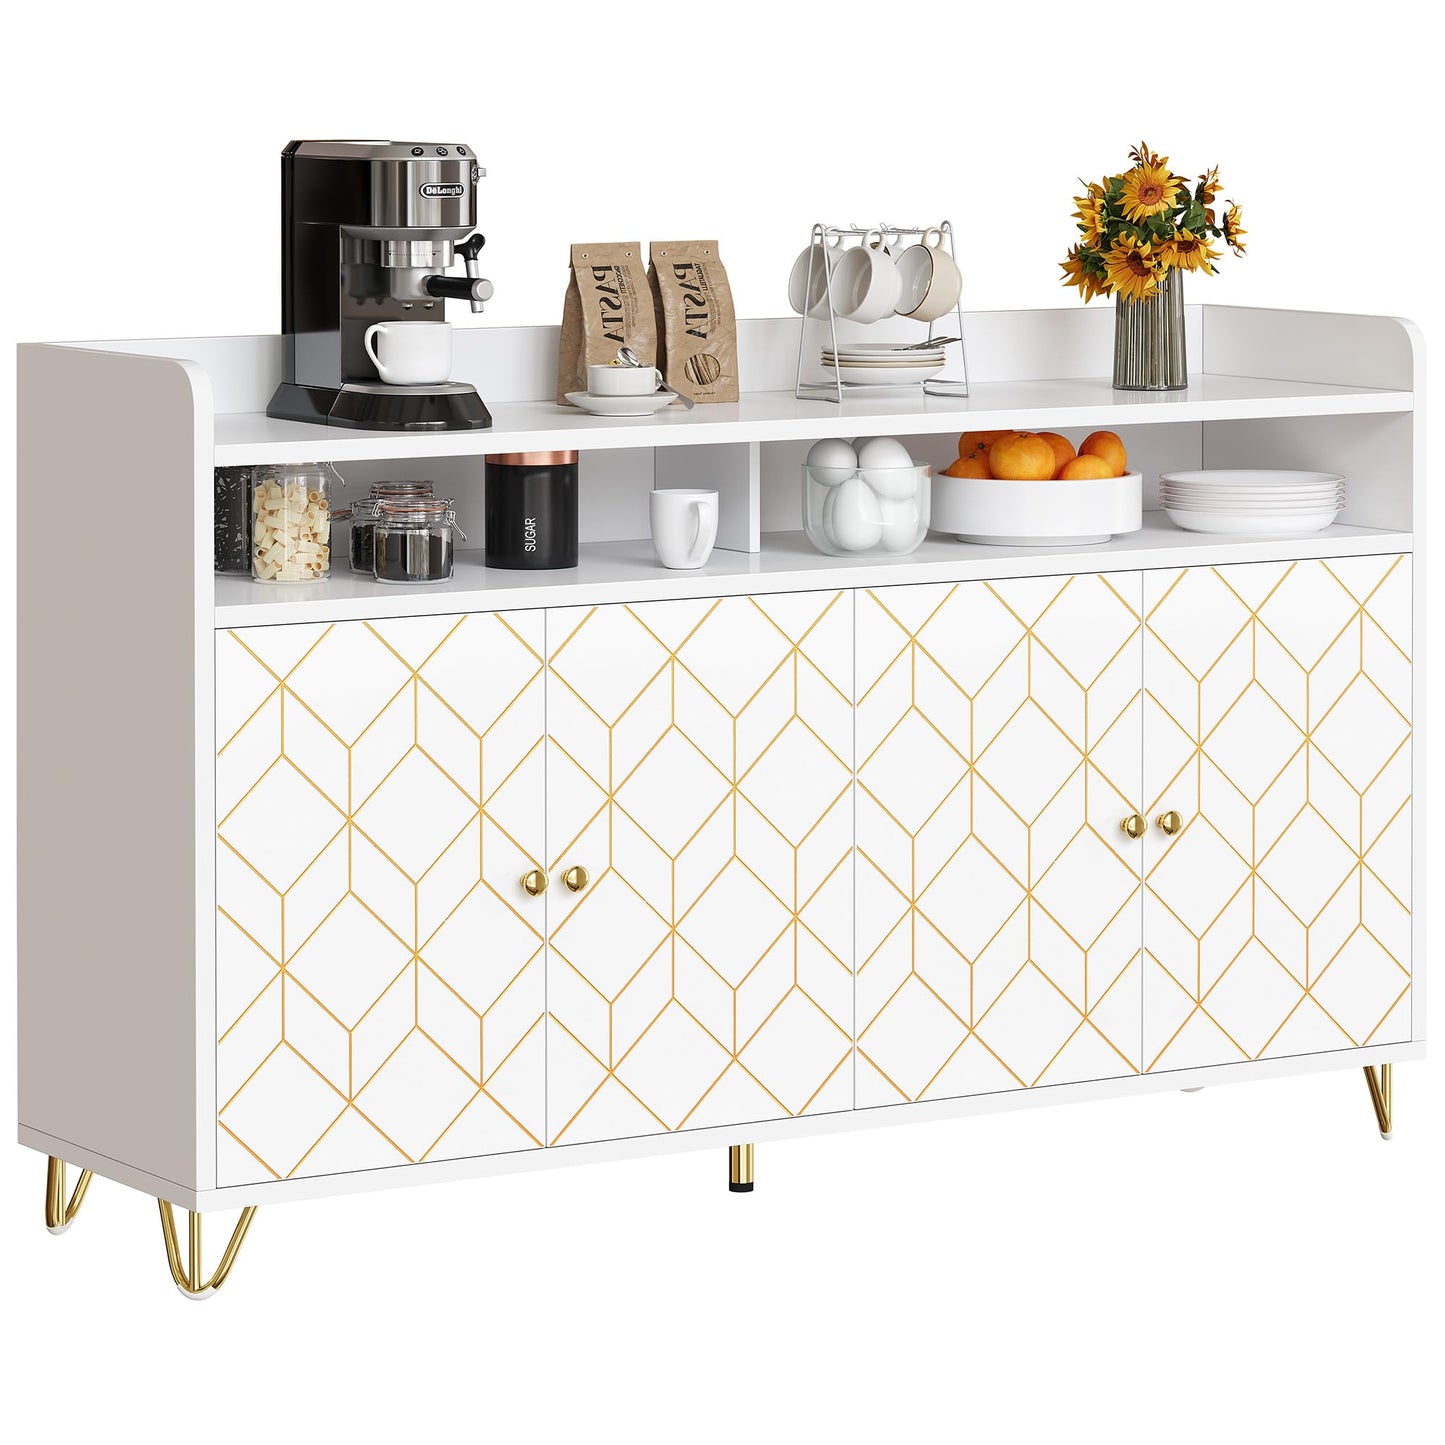 DWVO 59" Modern Storage Cabinet, Sideboard Buffet Cabinet with Gold Trim, Coffee Bar Cabinet with 4 Doors and Adjustable Shelves 300 lbs Capacity for Hallway, Kitchen or Living Room, White